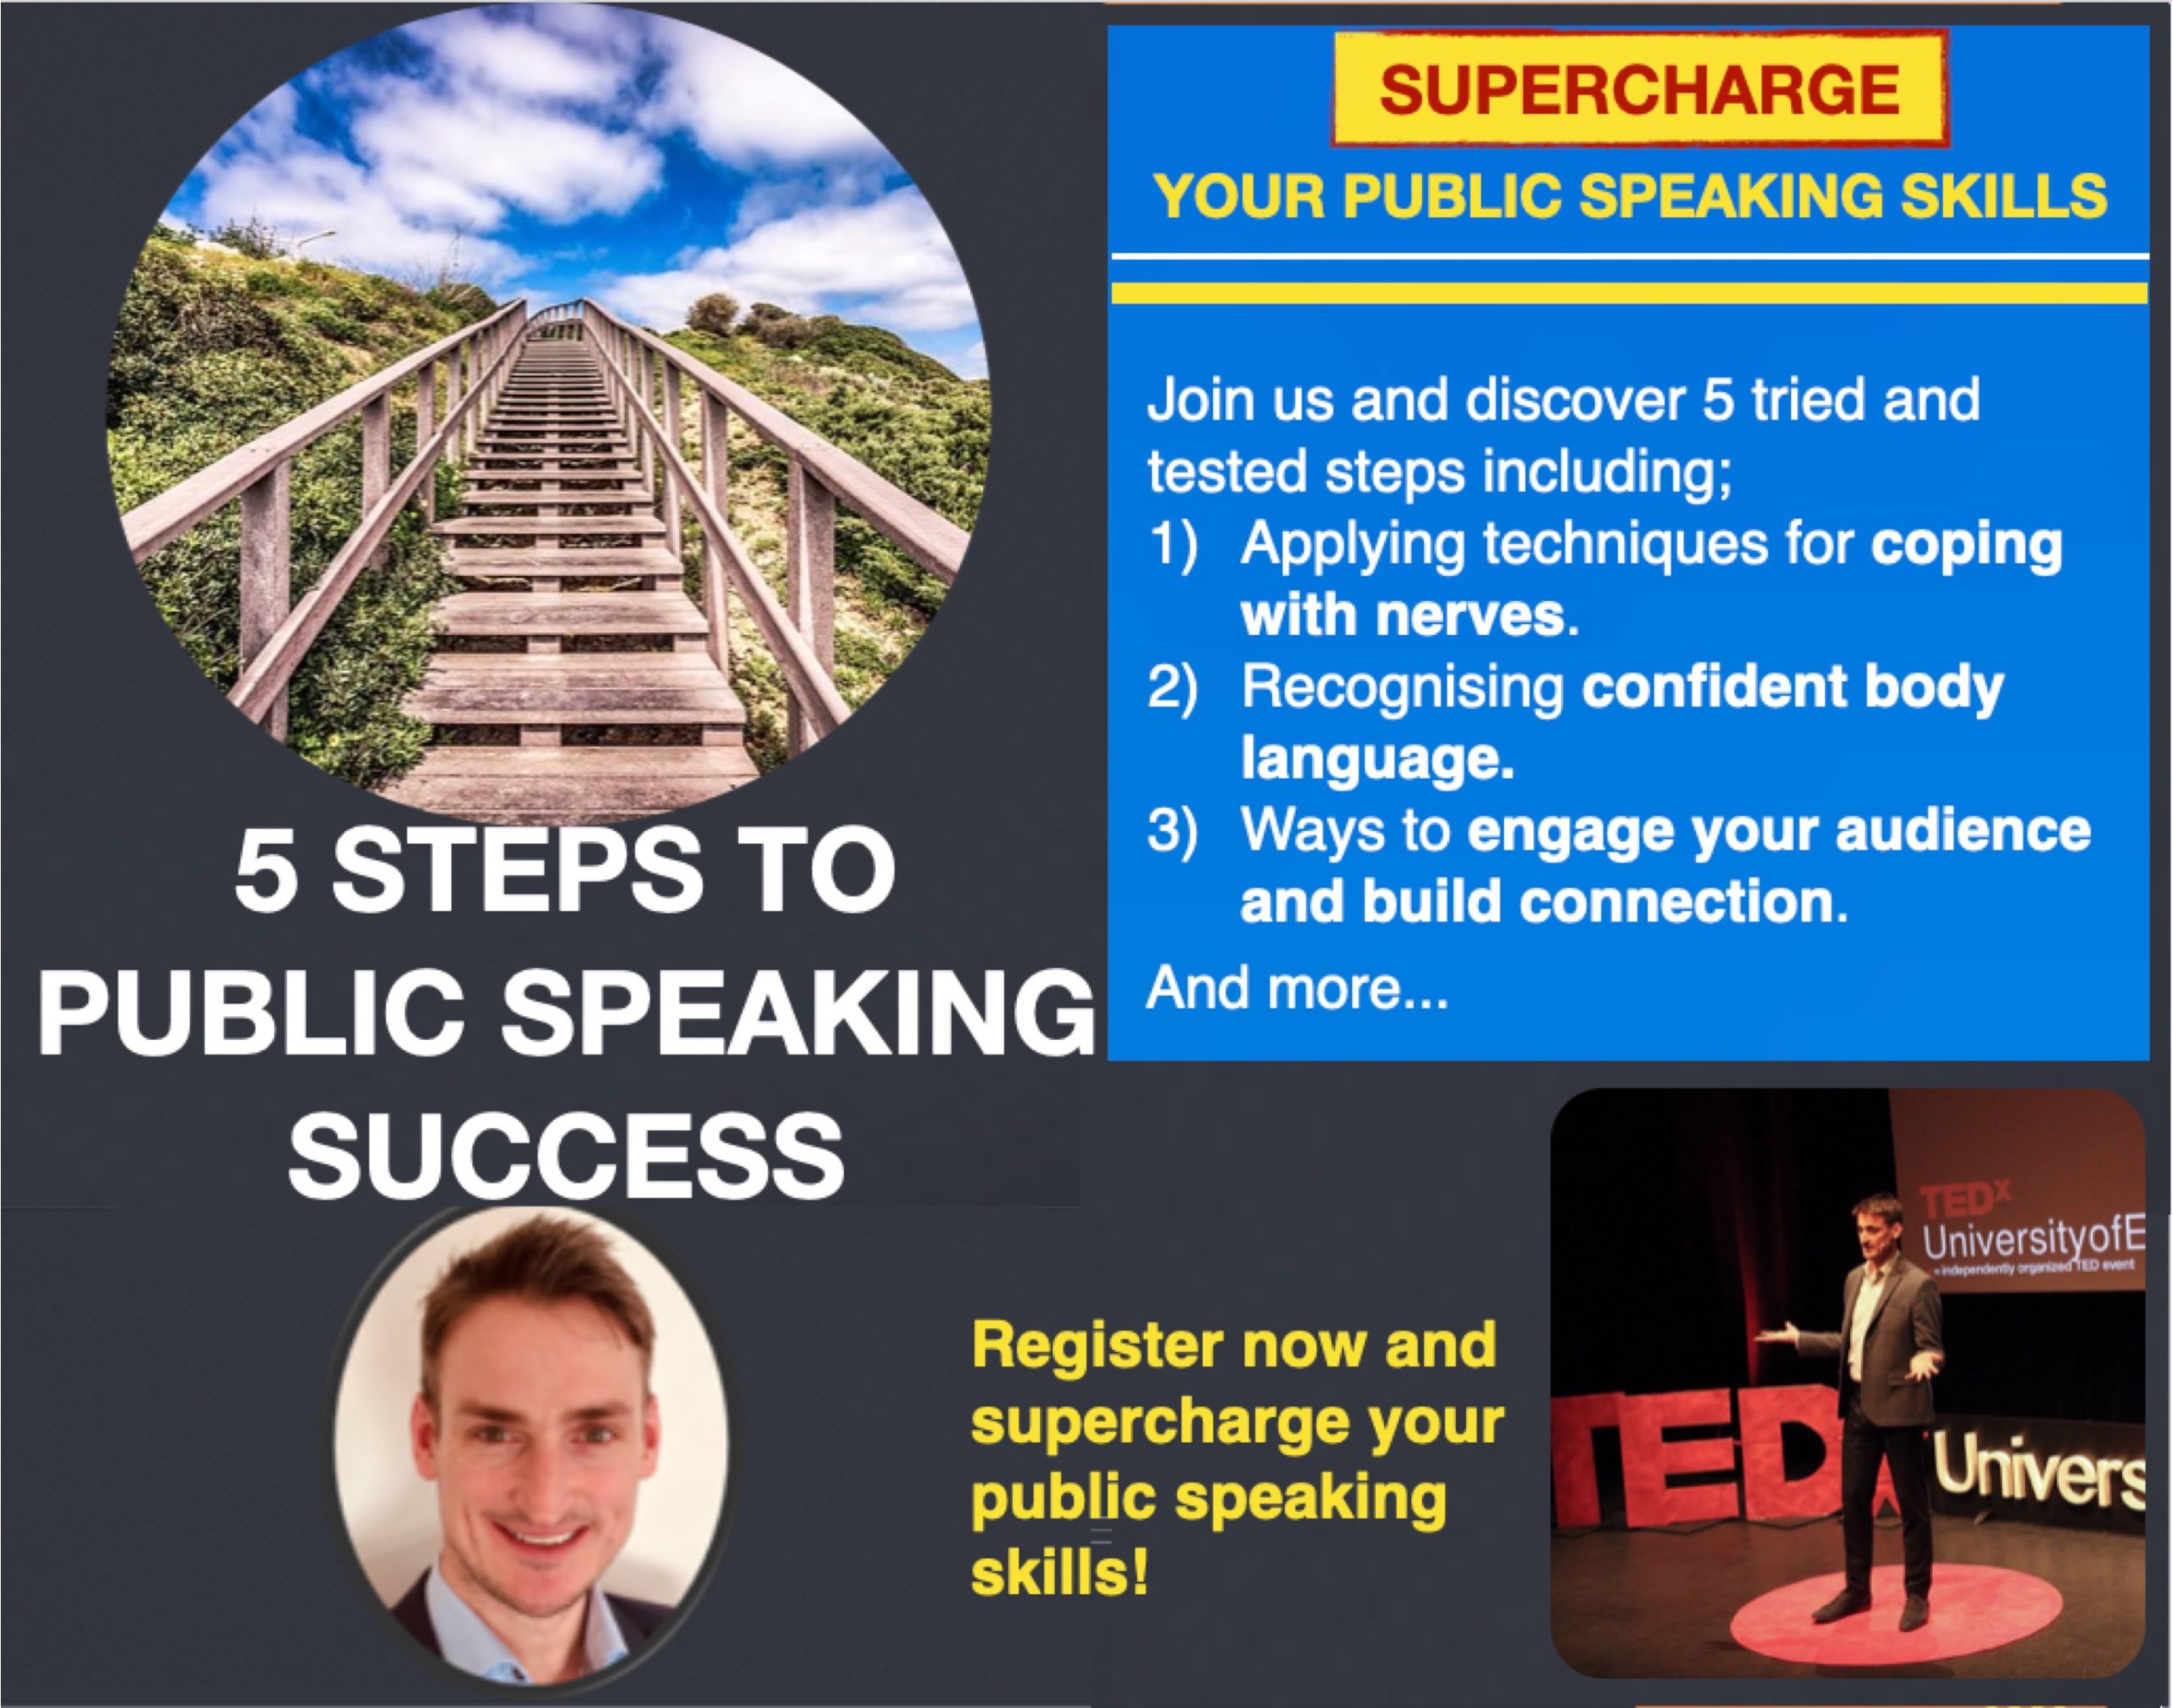 5 Steps to Public Speaking Success